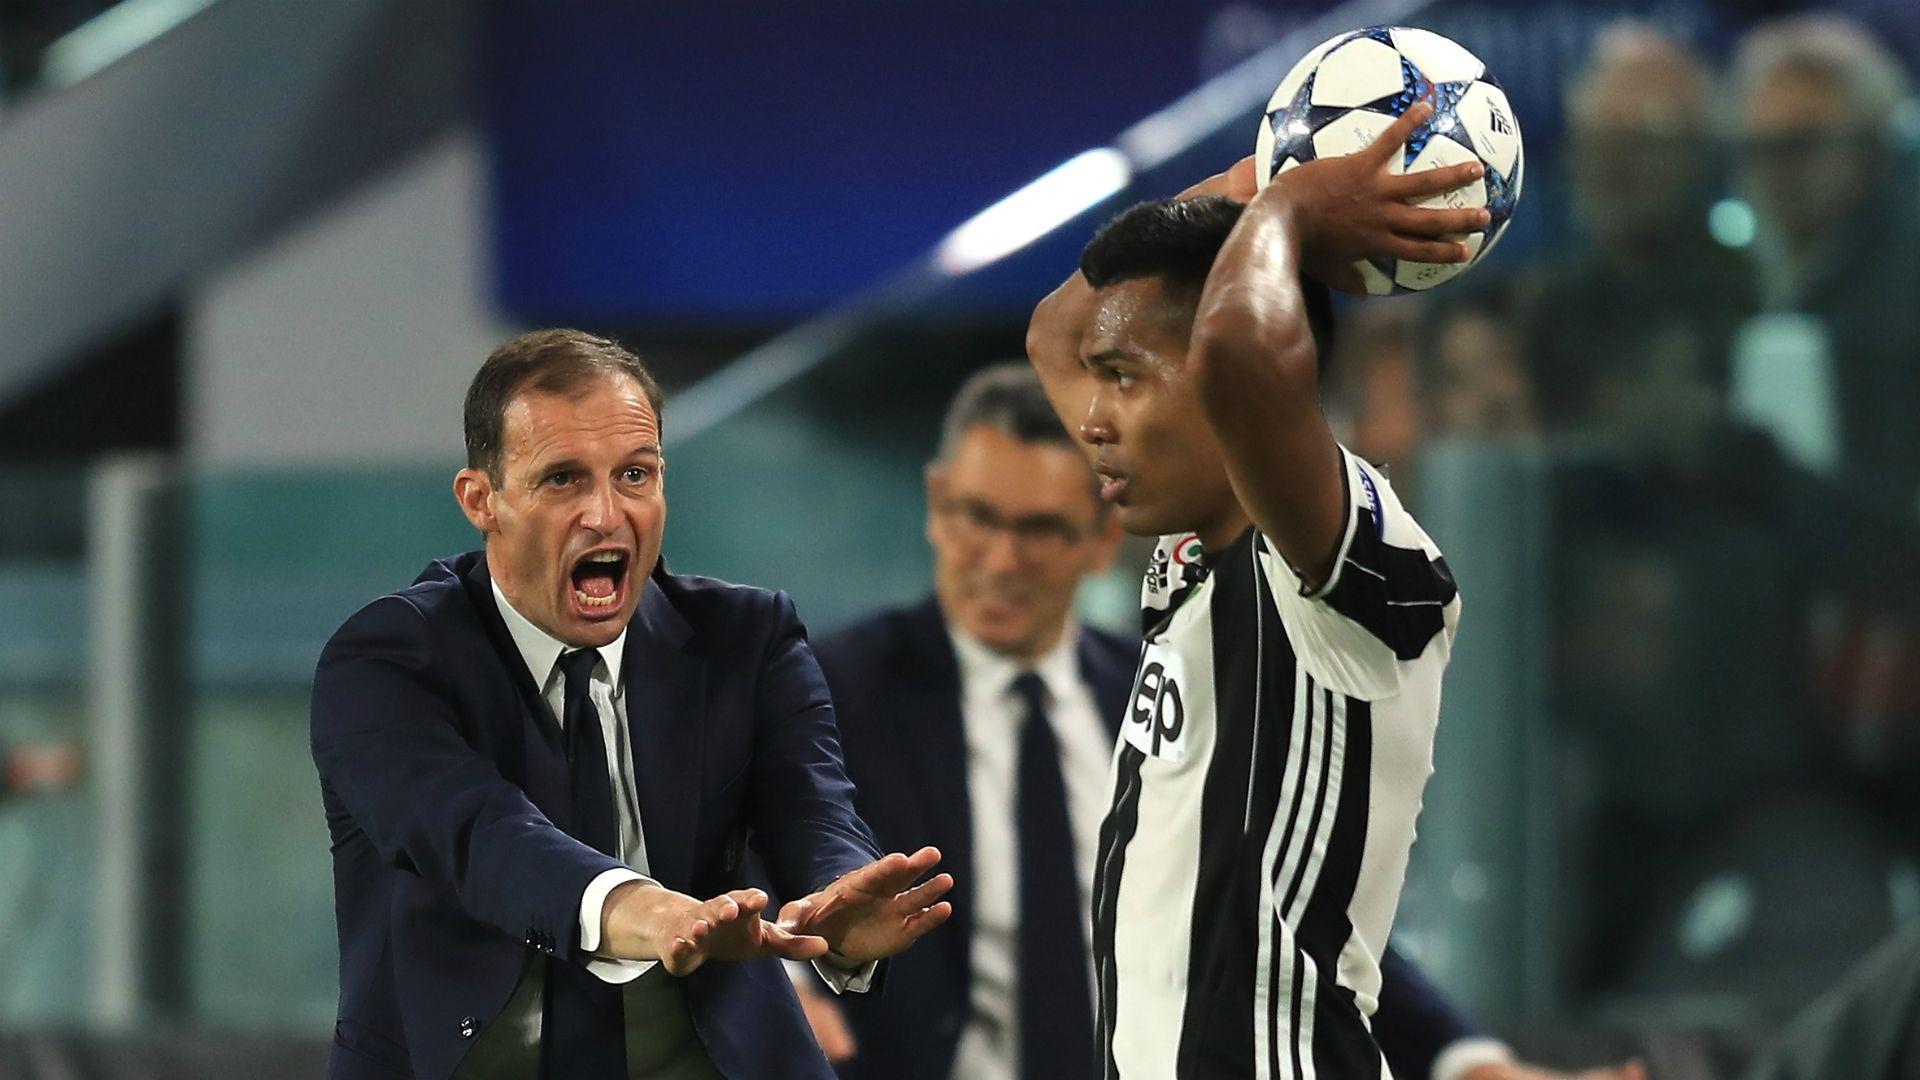 Alex Sandro not leaving Juventus for Chelsea, insists Massimiliano